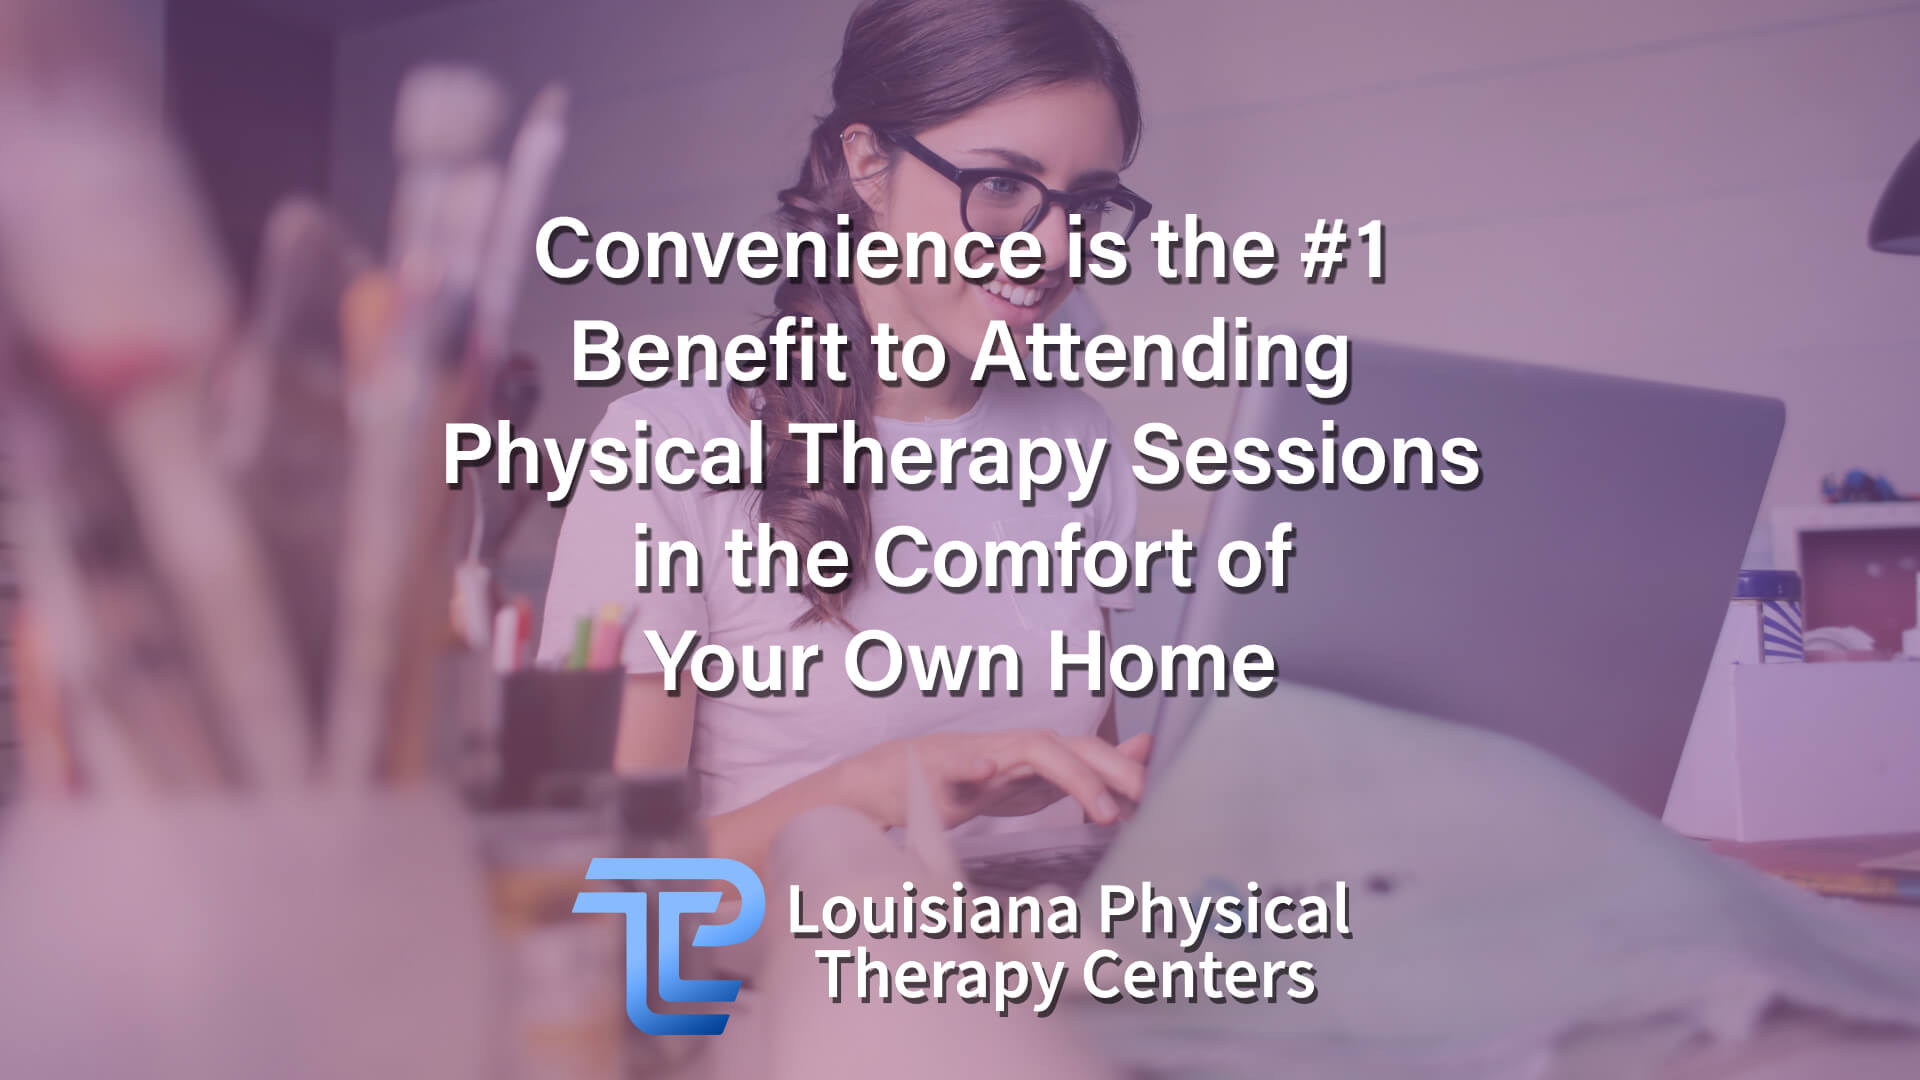 Convenience is the #1 Benefit to Attending Physical Therapy Sessions in the Comfort of Your Own Home